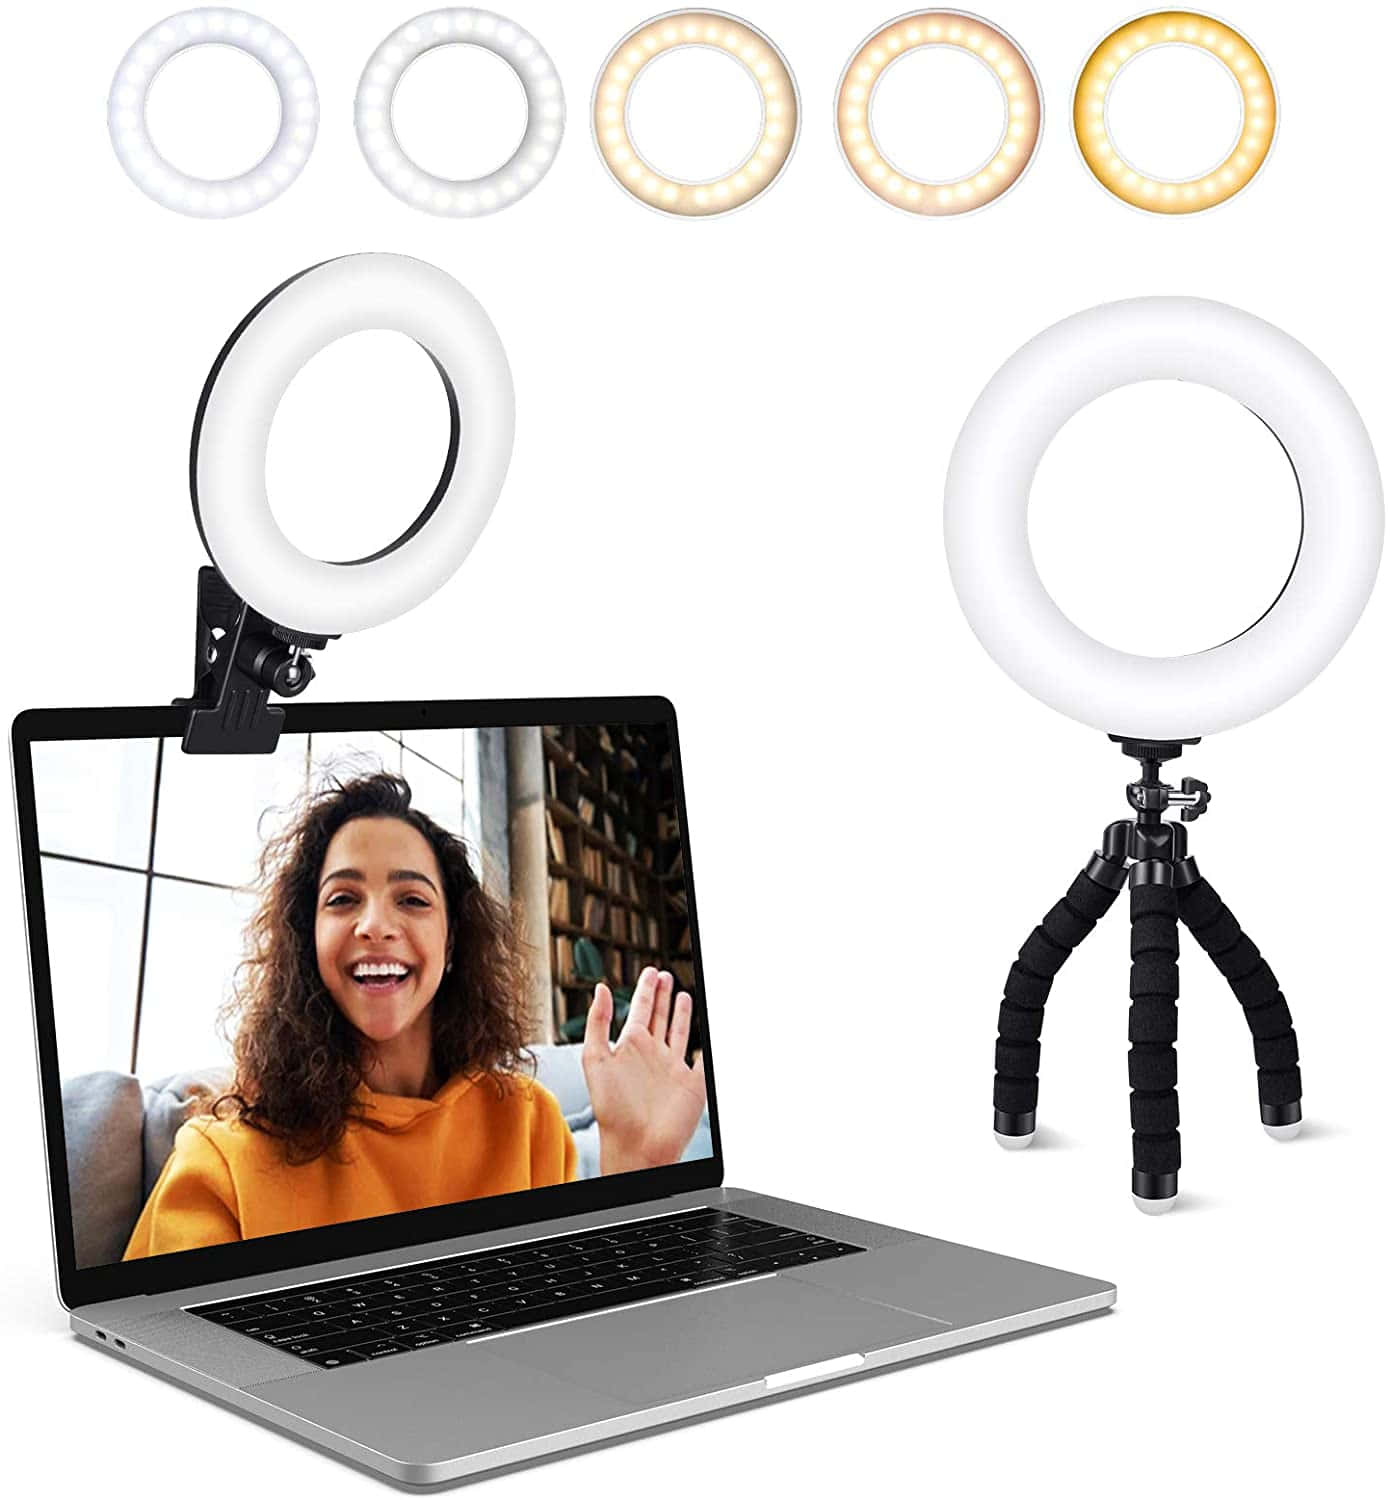 Get the perfect illumination for your scene with Ring Light